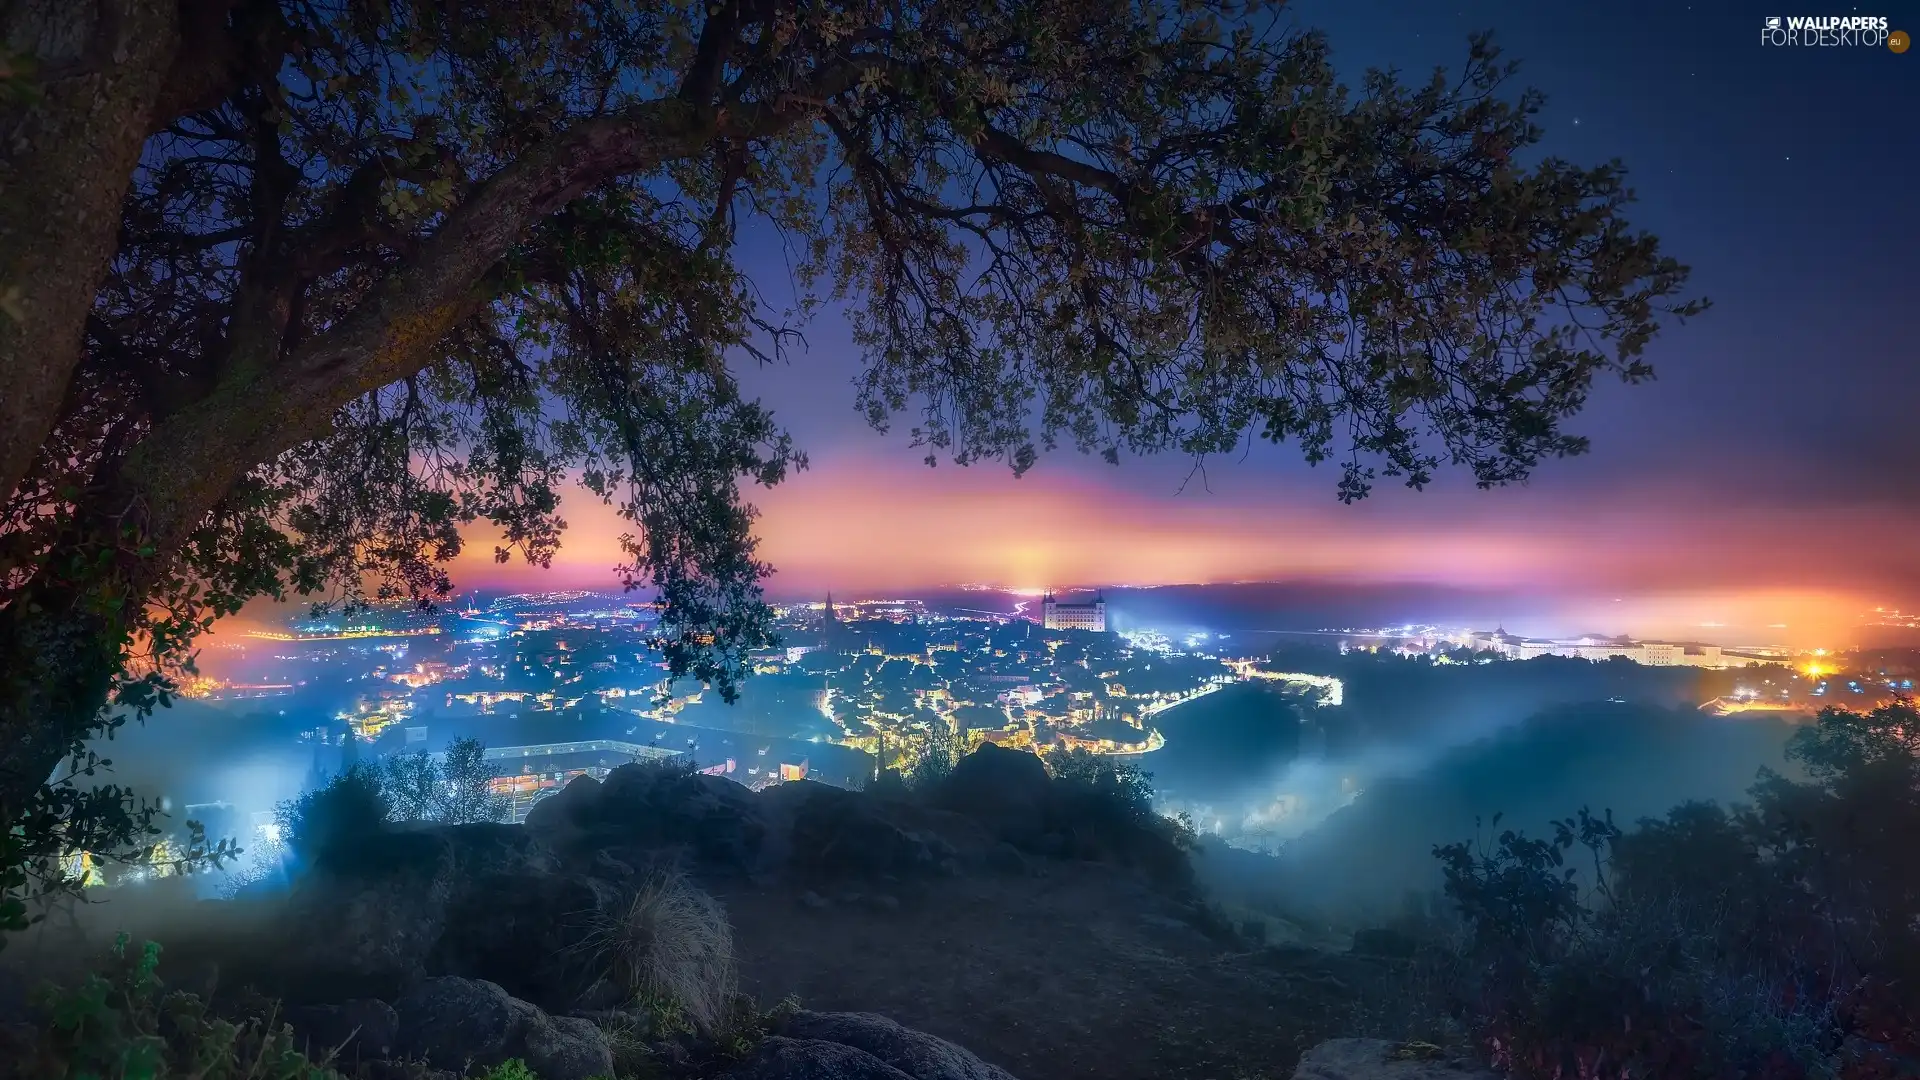 illuminated, The Hills, Town, Night, viewes, star, Fog, trees, Houses